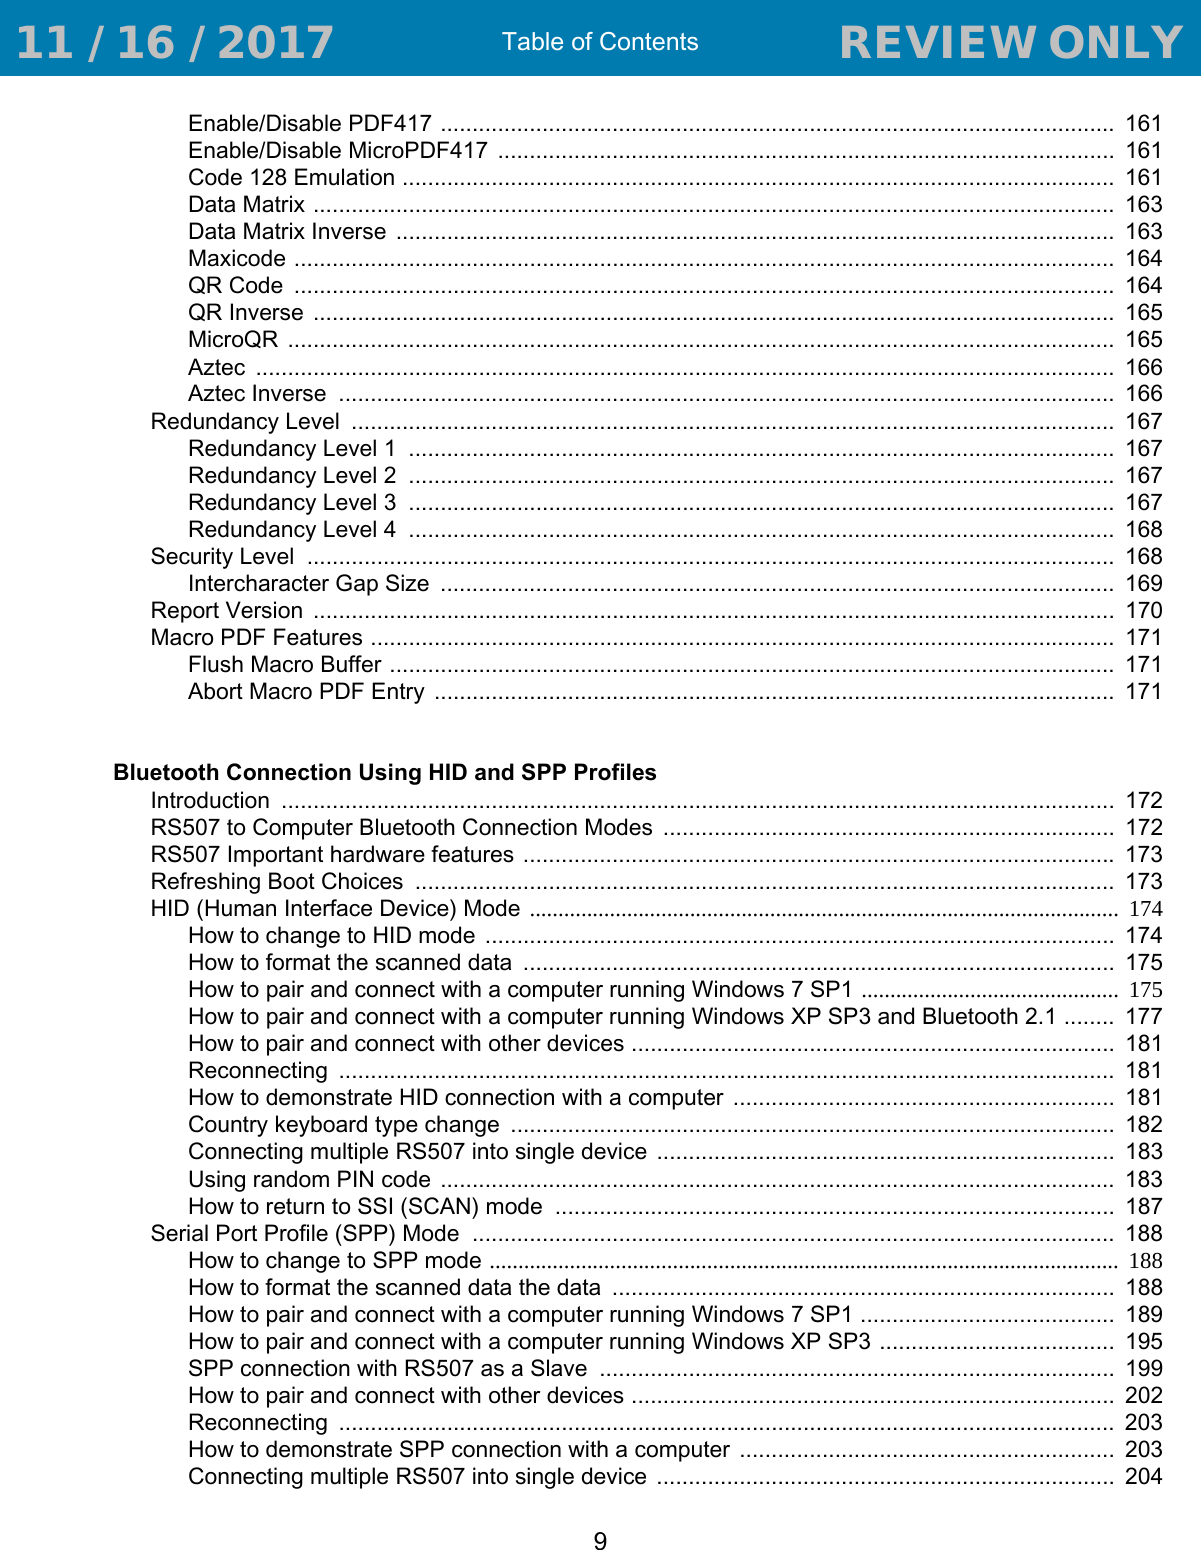 Table of Contents9Enable/Disable PDF417 ..........................................................................................................  161Enable/Disable MicroPDF417  .................................................................................................  161Code 128 Emulation ................................................................................................................  161Data Matrix ..............................................................................................................................  163Data Matrix Inverse  .................................................................................................................  163Maxicode .................................................................................................................................  164QR Code  .................................................................................................................................  164QR Inverse  ..............................................................................................................................  165MicroQR  ..................................................................................................................................  165Aztec  .......................................................................................................................................  166Aztec Inverse  ..........................................................................................................................  166Redundancy Level  ........................................................................................................................  167Redundancy Level 1  ...............................................................................................................  167Redundancy Level 2  ...............................................................................................................  167Redundancy Level 3  ...............................................................................................................  167Redundancy Level 4  ...............................................................................................................  168Security Level  ...............................................................................................................................  168Intercharacter Gap Size  ..........................................................................................................  169Report Version  ..............................................................................................................................  170Macro PDF Features .....................................................................................................................  171Flush Macro Buffer ..................................................................................................................  171Abort Macro PDF Entry  ...........................................................................................................  171Bluetooth Connection Using HID and SPP ProfilesIntroduction  ...................................................................................................................................  172RS507 to Computer Bluetooth Connection Modes  .......................................................................  172RS507 Important hardware features ............................................................................................. 173Refreshing Boot Choices  ..............................................................................................................  173HID (Human Interface Device) Mode .......................................................................................................  174How to change to HID mode  ...................................................................................................  174How to format the scanned data  .............................................................................................  175How to pair and connect with a computer running Windows 7 SP1 ............................................. 175How to pair and connect with a computer running Windows XP SP3 and Bluetooth 2.1 ........  177How to pair and connect with other devices ............................................................................  181Reconnecting  ..........................................................................................................................  181How to demonstrate HID connection with a computer ............................................................  181Country keyboard type change  ...............................................................................................  182Connecting multiple RS507 into single device  ........................................................................  183Using random PIN code ..........................................................................................................  183How to return to SSI (SCAN) mode  ........................................................................................  187Serial Port Profile (SPP) Mode  .....................................................................................................  188How to change to SPP mode ..............................................................................................................  188How to format the scanned data the data  ...............................................................................  188How to pair and connect with a computer running Windows 7 SP1 ........................................  189How to pair and connect with a computer running Windows XP SP3 .....................................  195SPP connection with RS507 as a Slave  .................................................................................  199How to pair and connect with other devices ............................................................................  202Reconnecting  ..........................................................................................................................  203How to demonstrate SPP connection with a computer  ...........................................................  203Connecting multiple RS507 into single device  ........................................................................  204 11 / 16 / 2017                                  REVIEW ONLY                             REVIEW ONLY - REVIEW ONLY - REVIEW ONLY